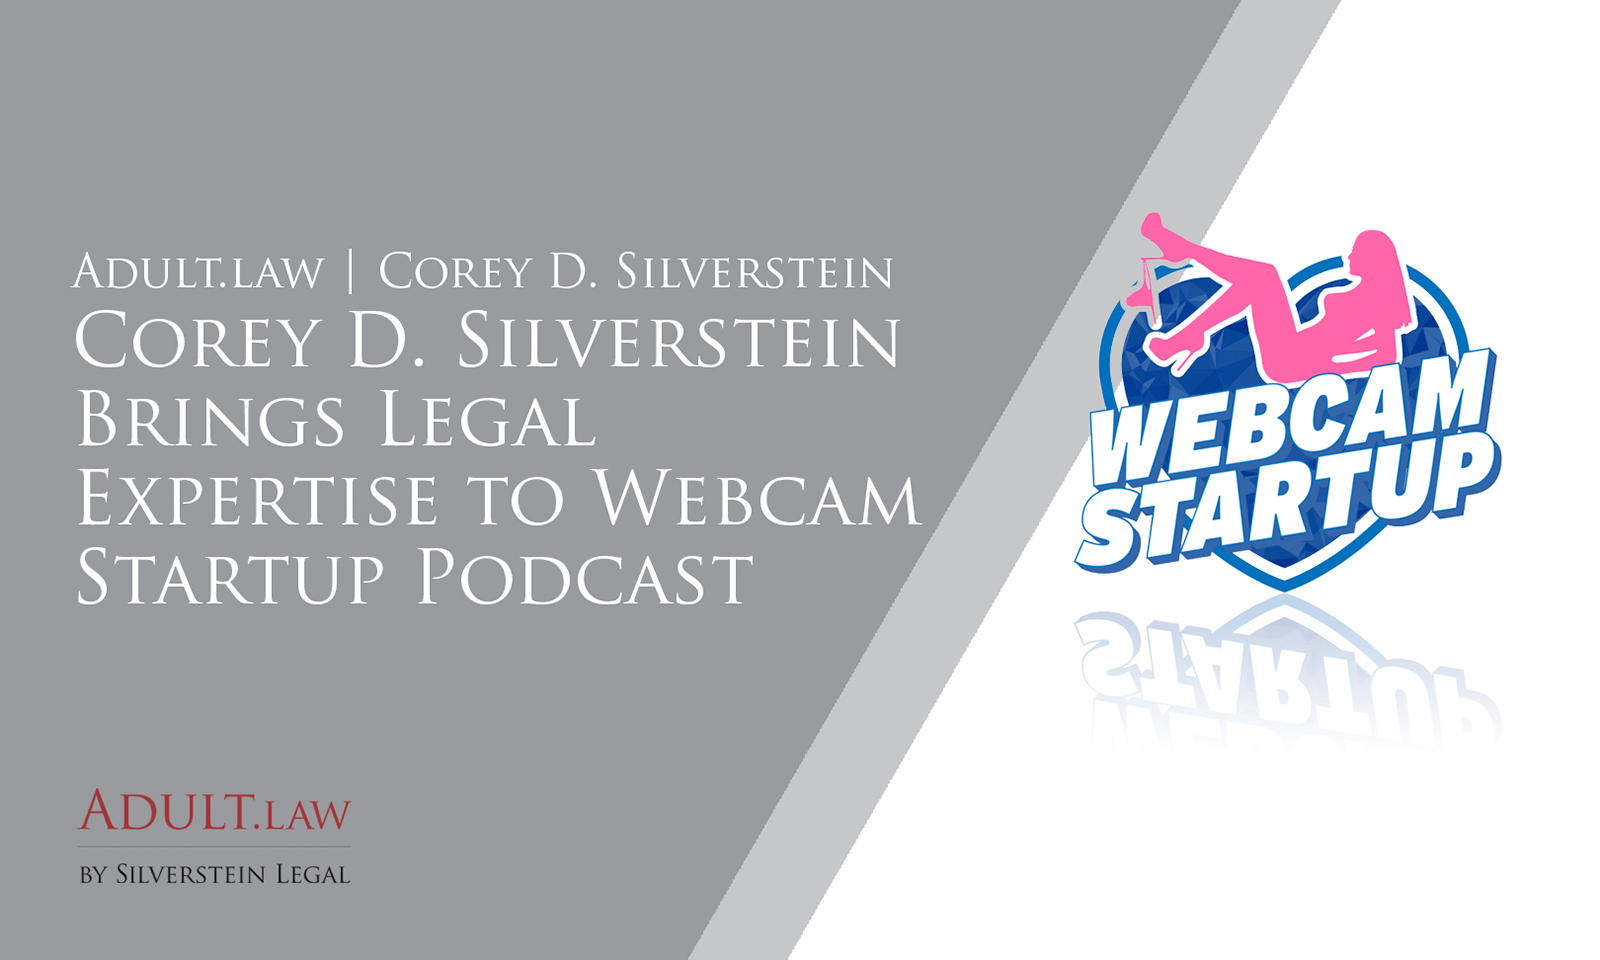 Corey D. Silverstein Gives Legal Advice on Webcam Startup Podcast